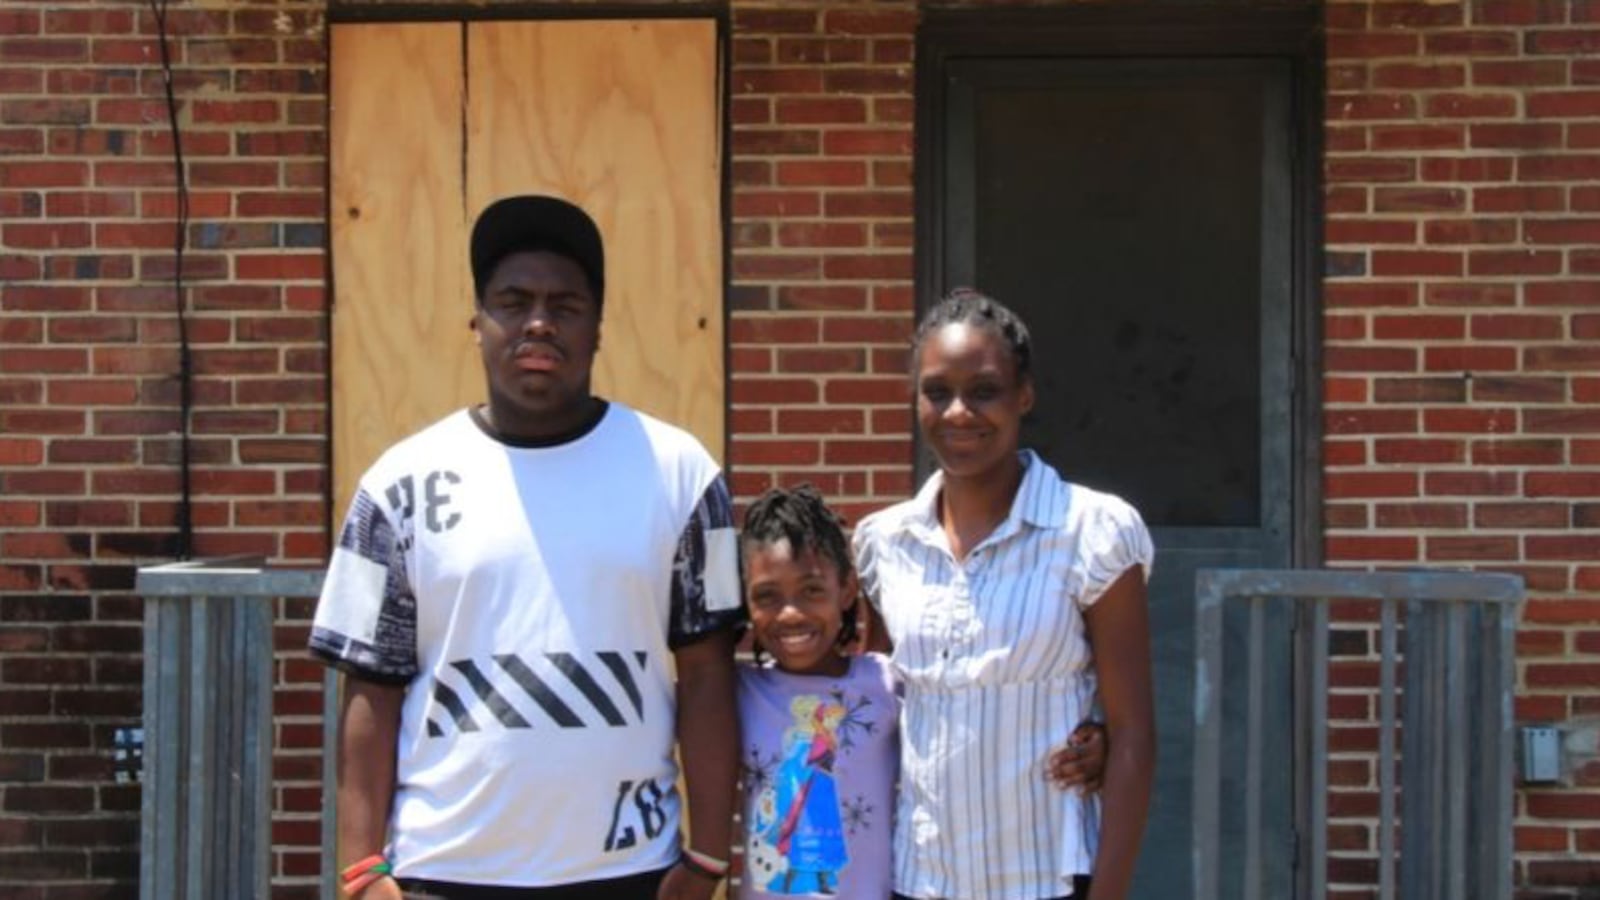 Tiara Edmond (right) and her children Jamal, 16, and Joemaya, 9, stand outside their apartment in the Foote Homes housing project.